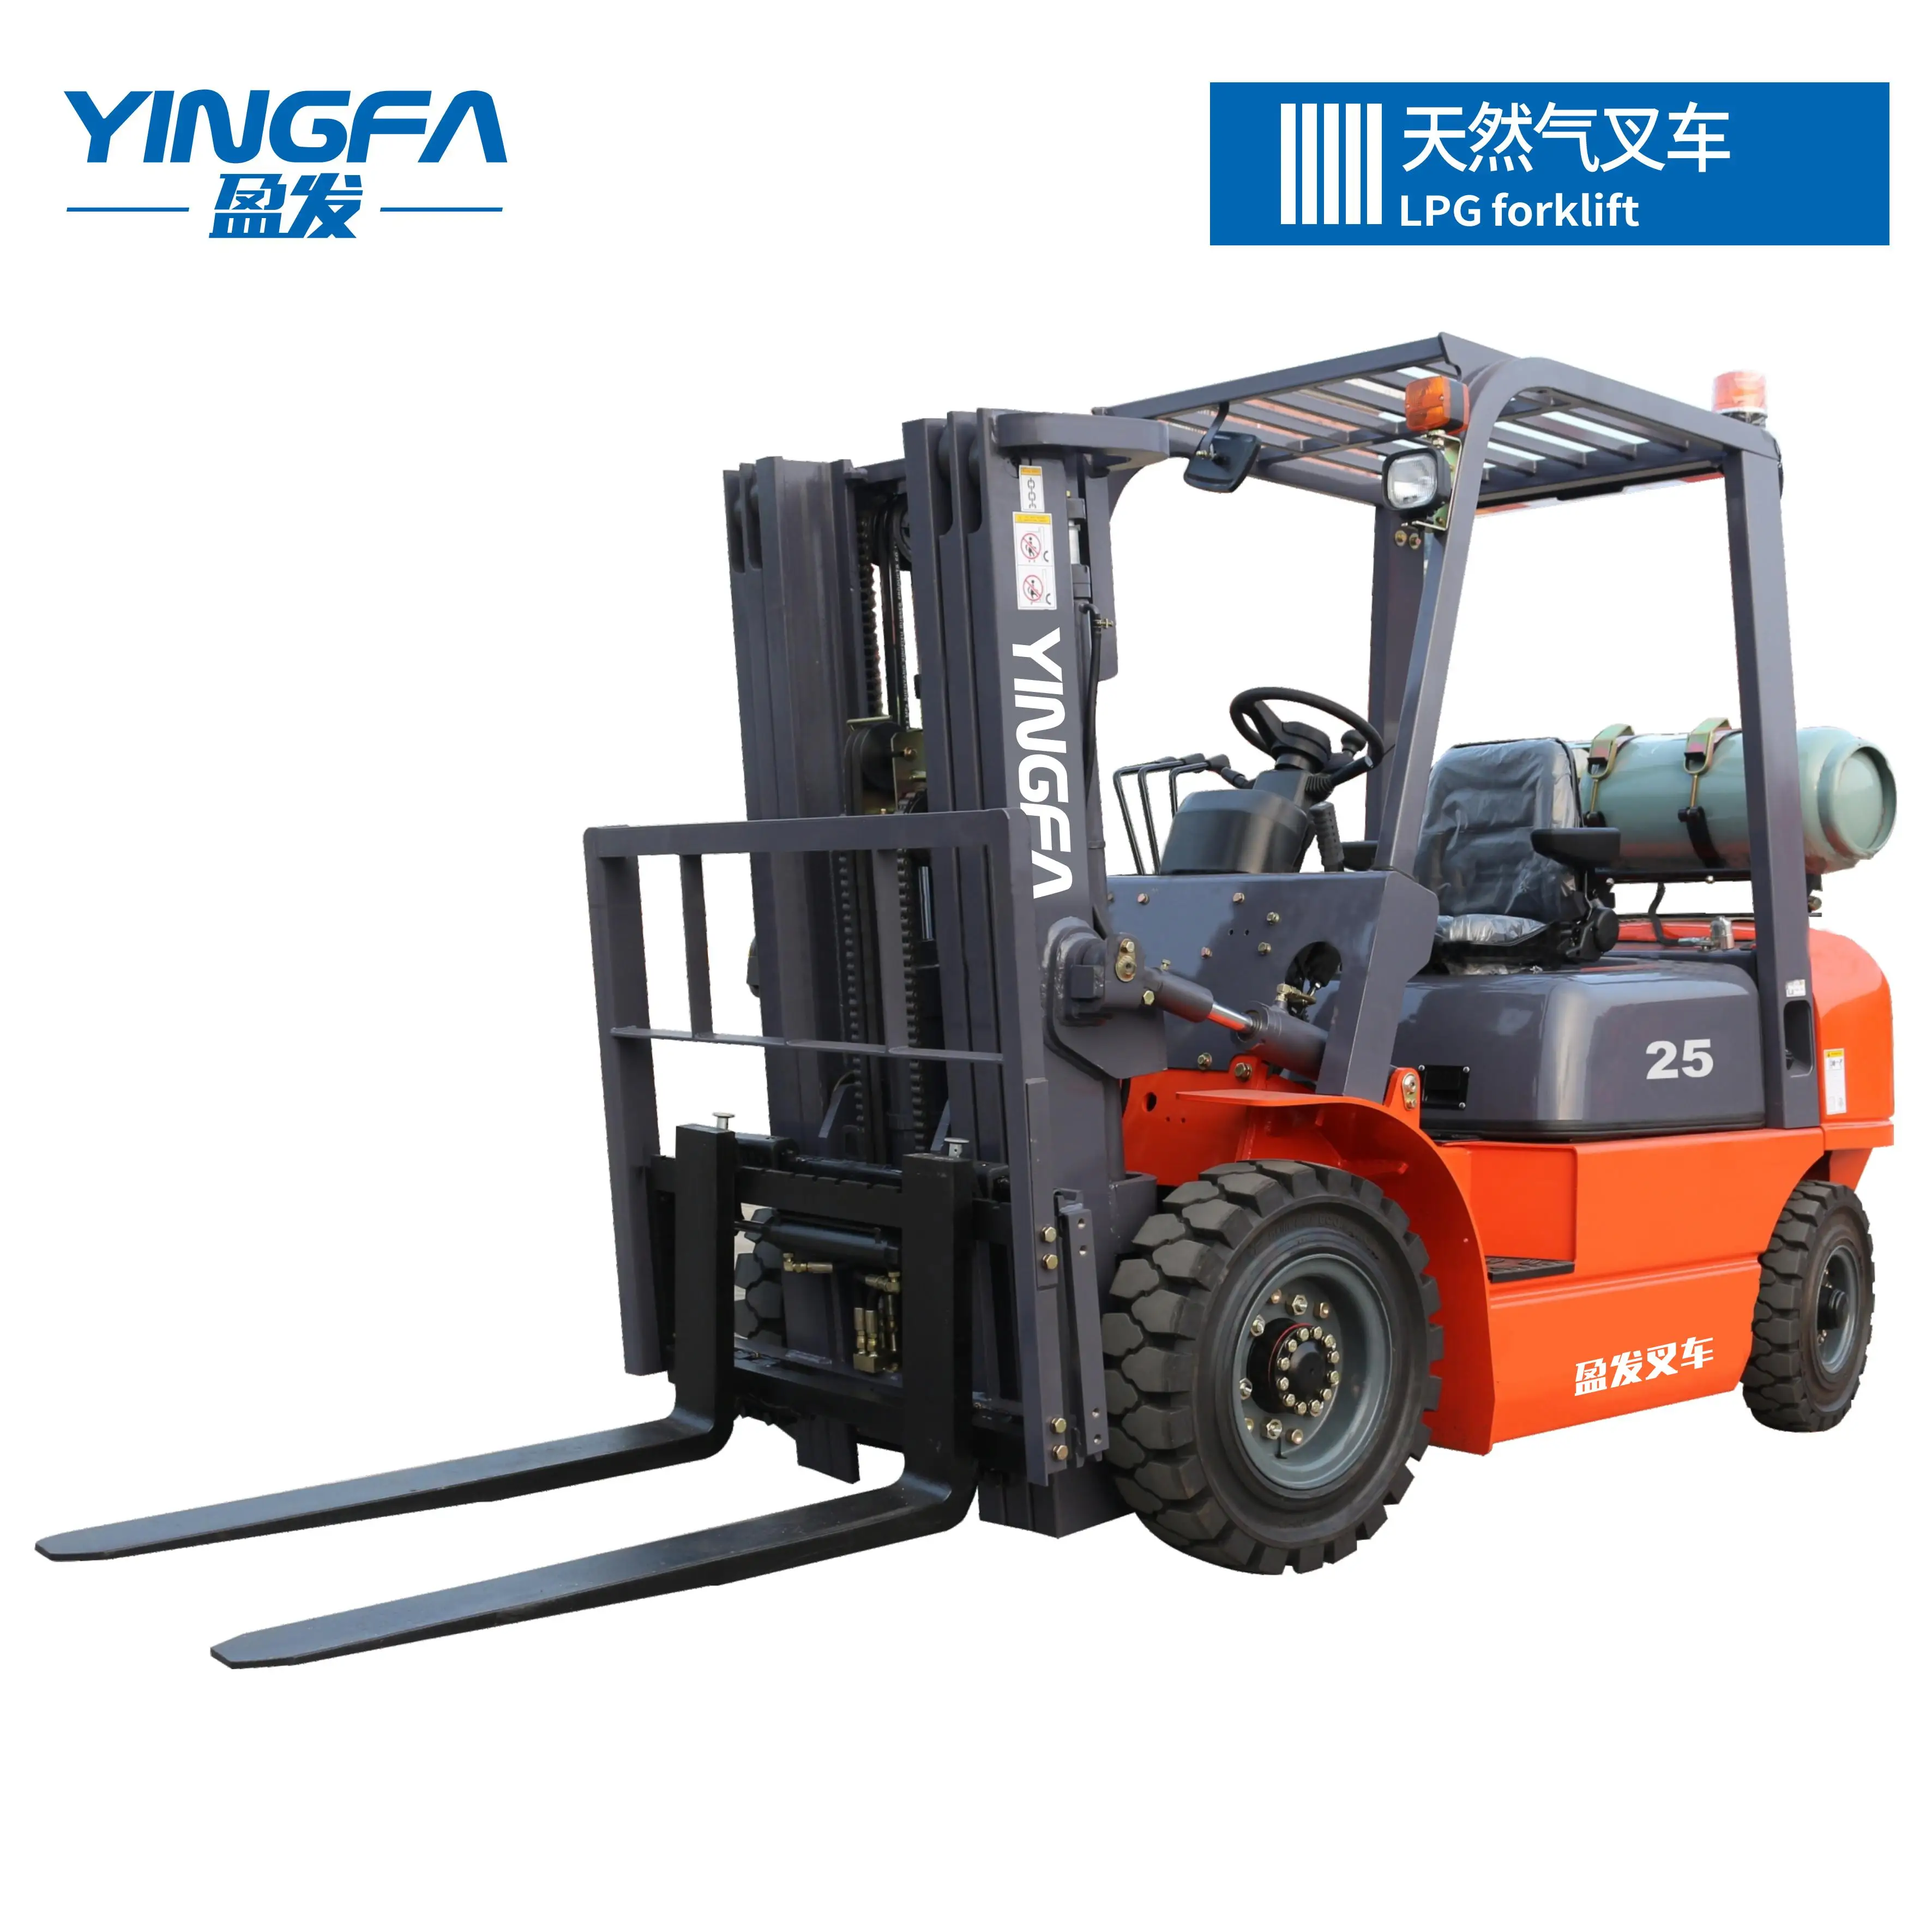 factory price Chinese top sale and quality forklift FOB6000usd  factory sale price ATTACHMENT WITH FACTORY DIRECT